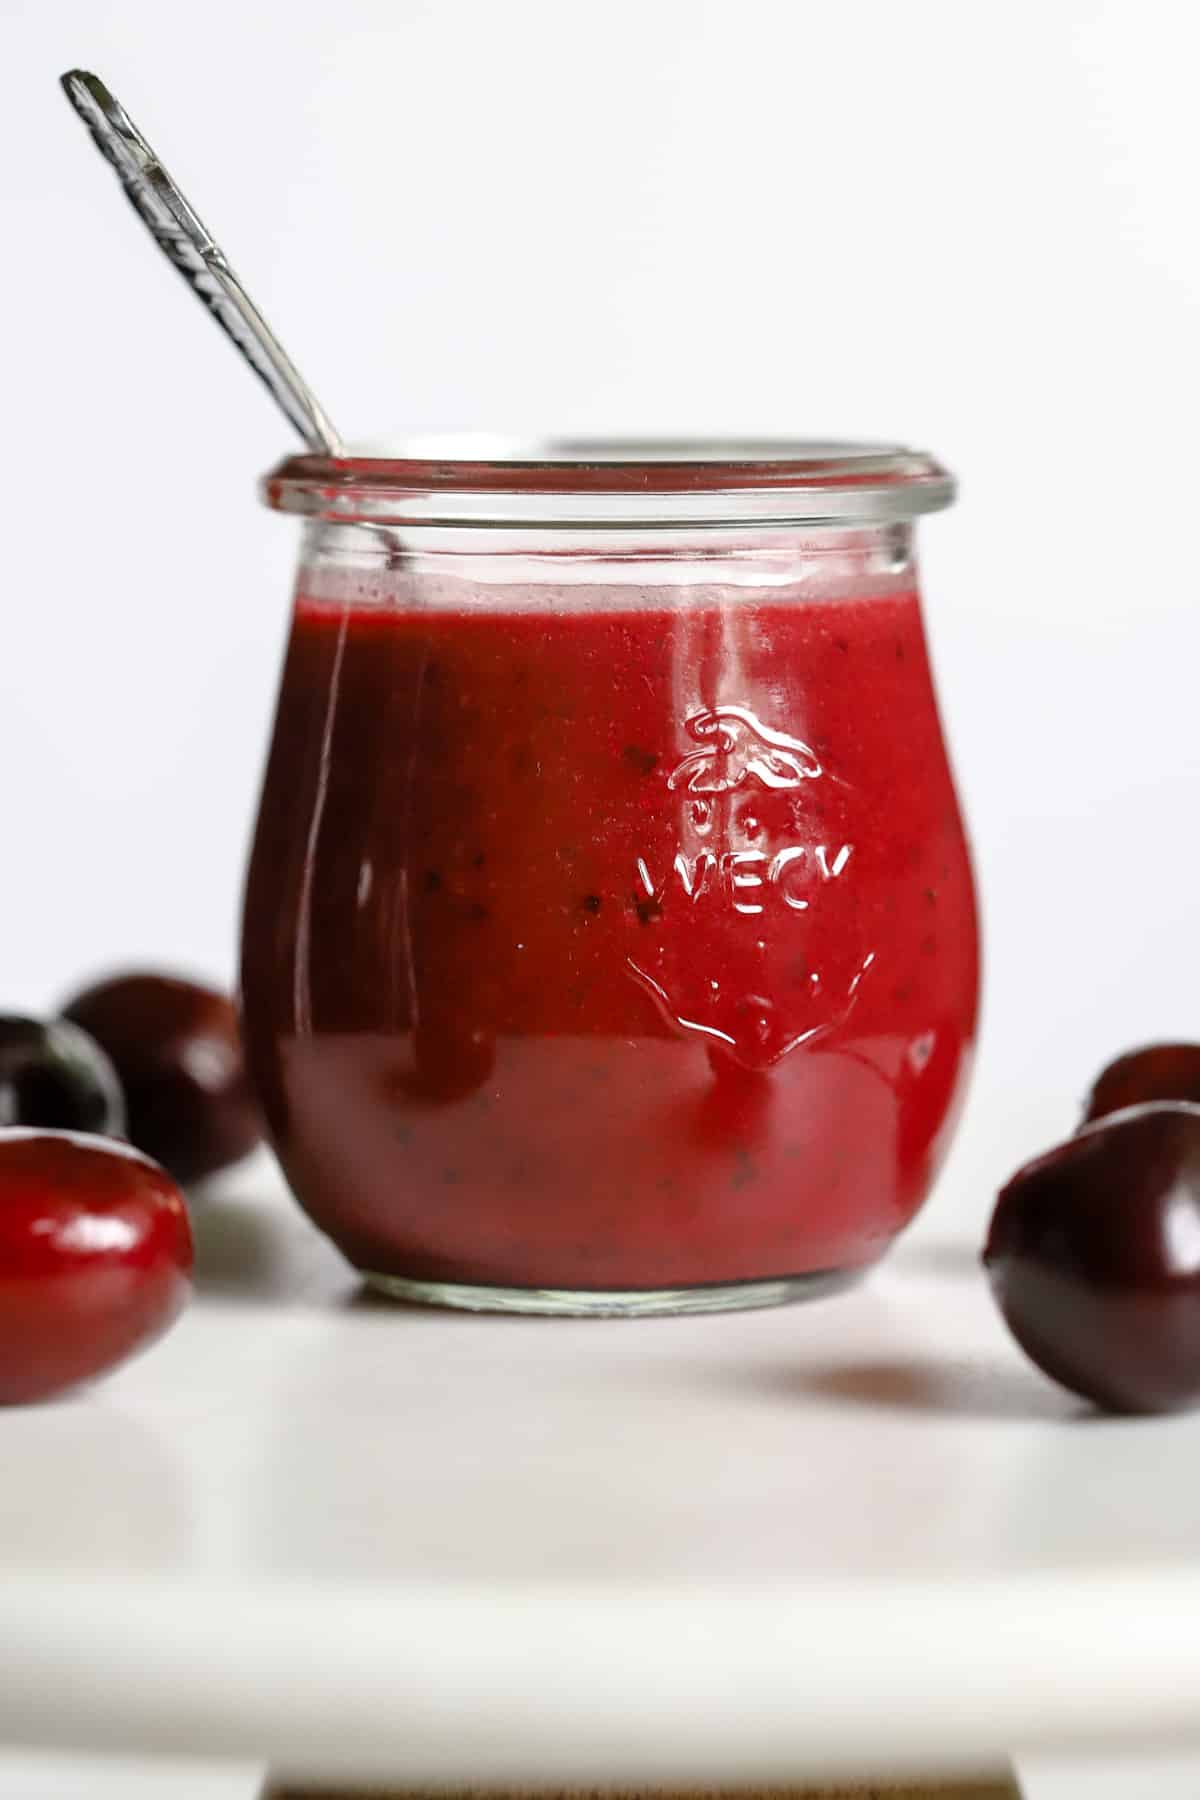 Cherry vinaigrette in small glass jar with spoon, on white marble stand with a few cherries